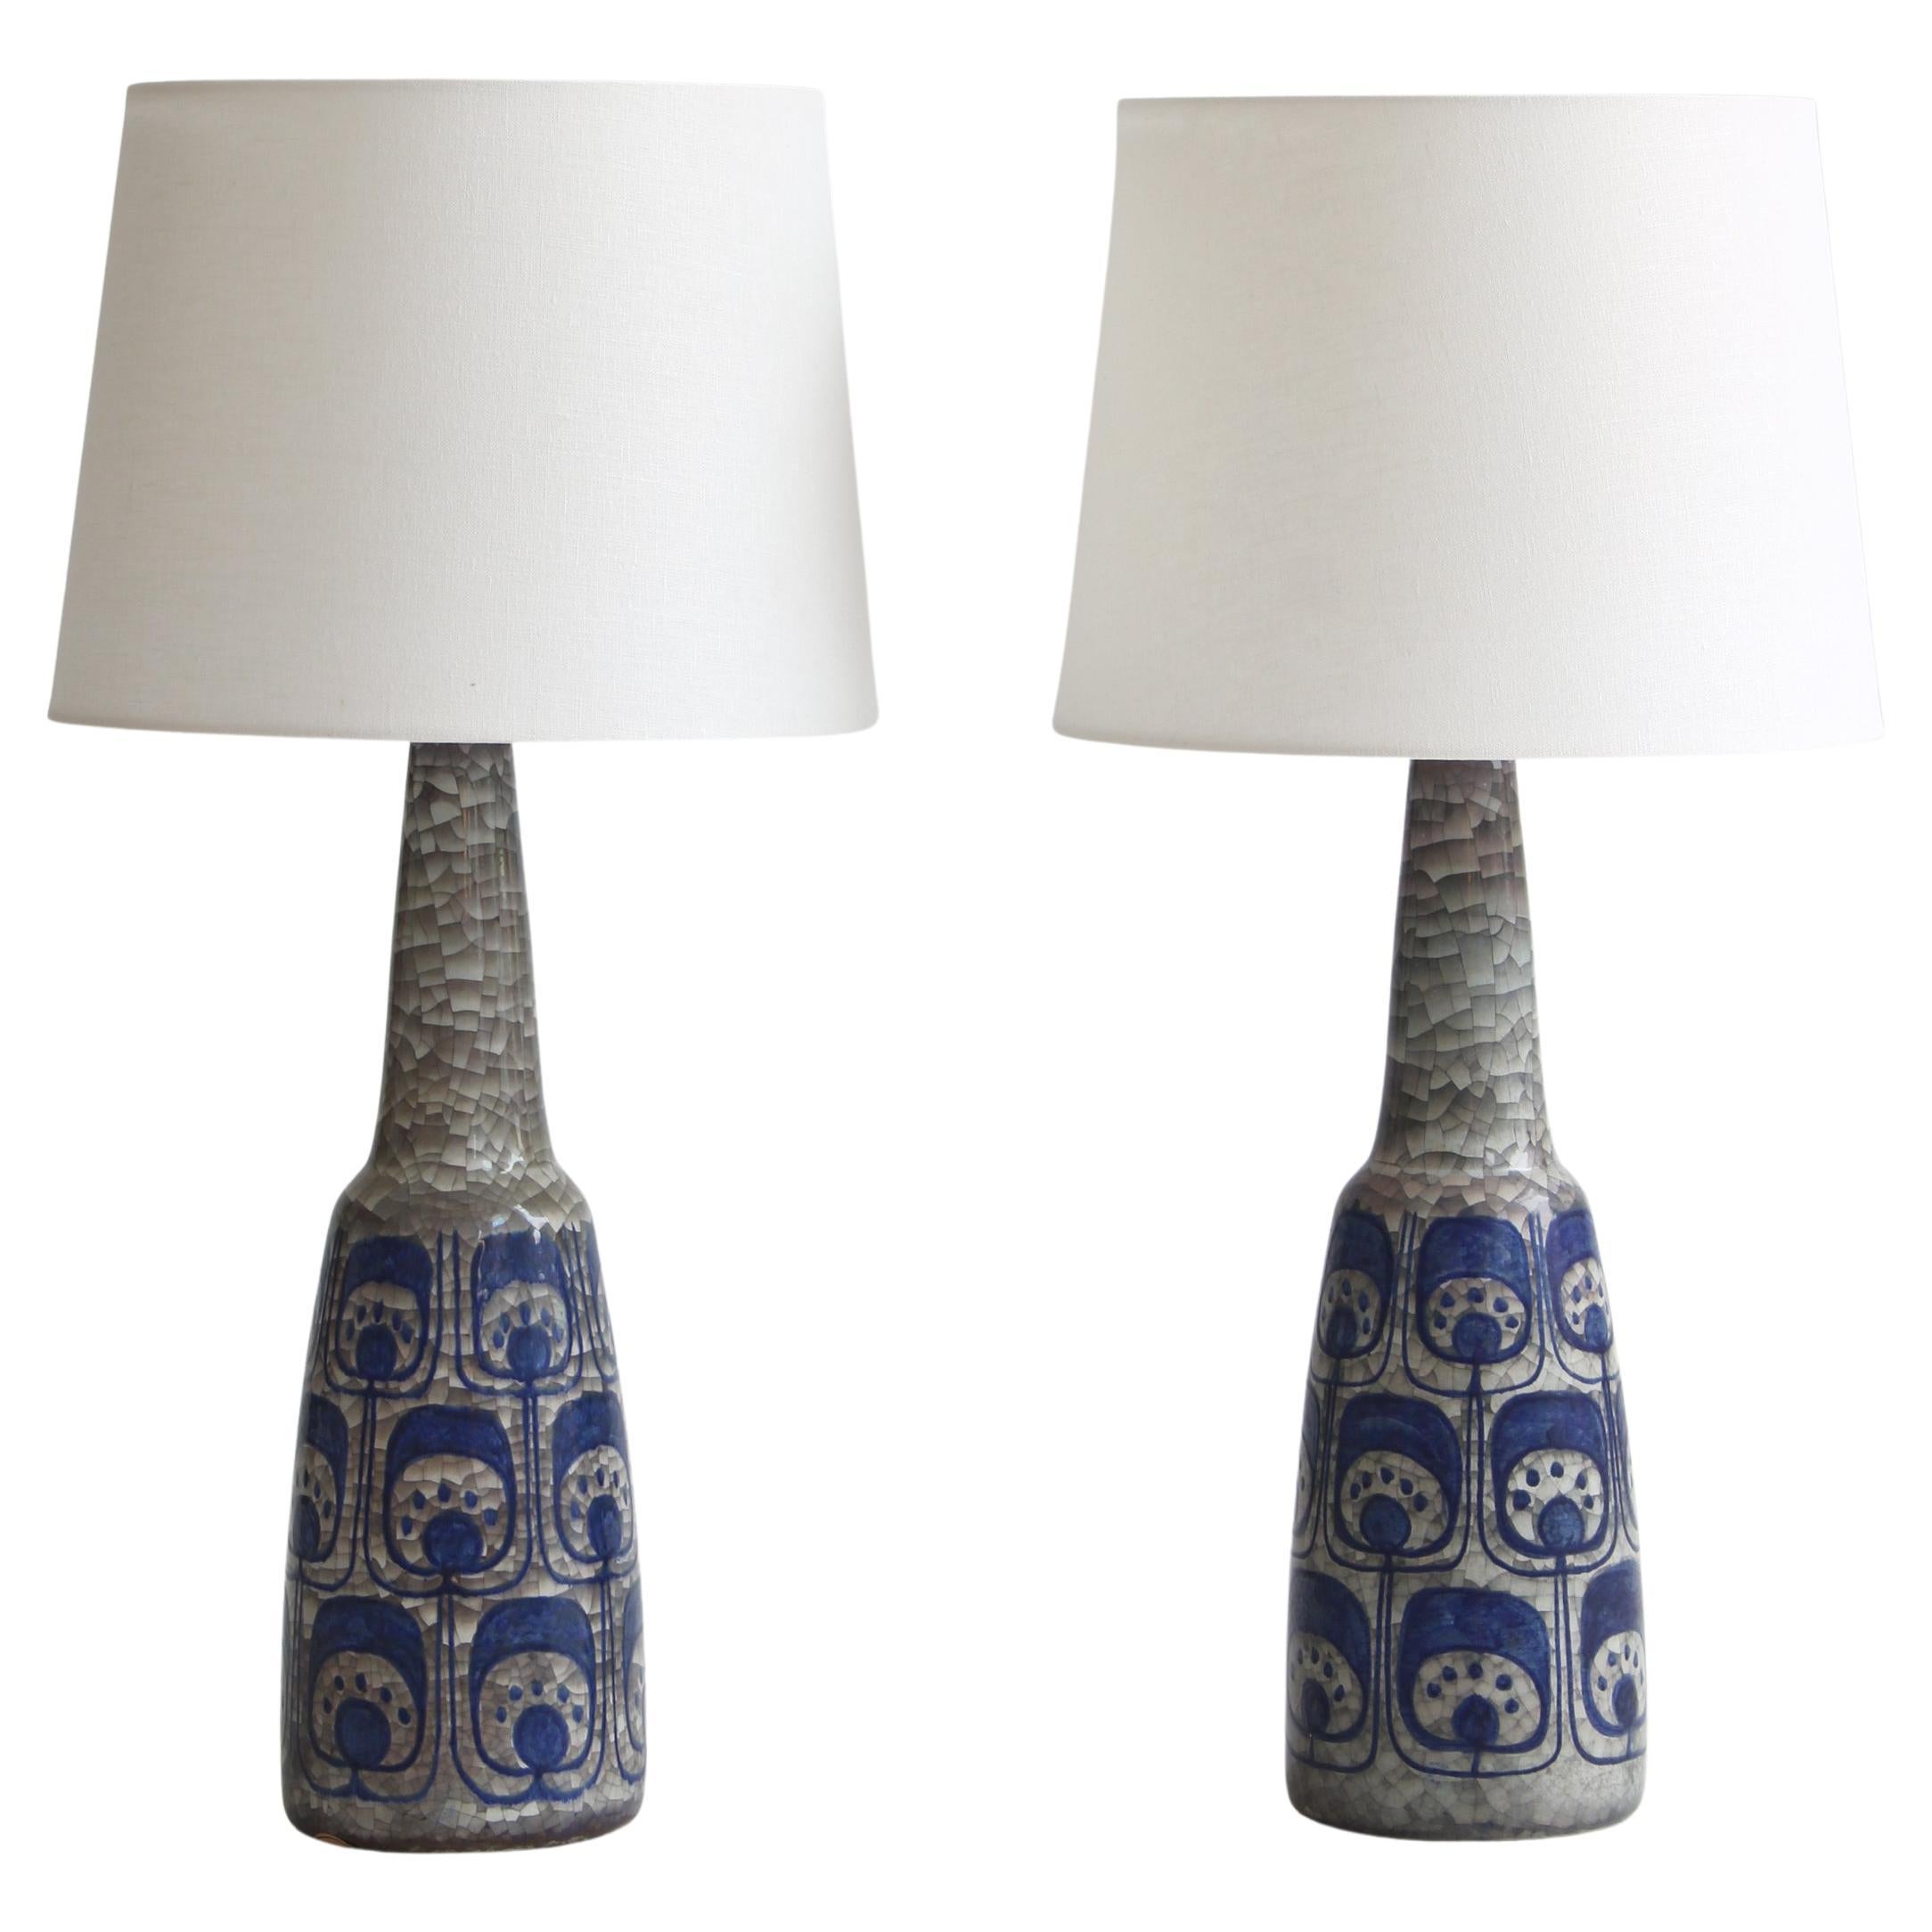 Pair of Stoneware Table Lamps by Michael Andersen & Sons, Denmark in the 1960s